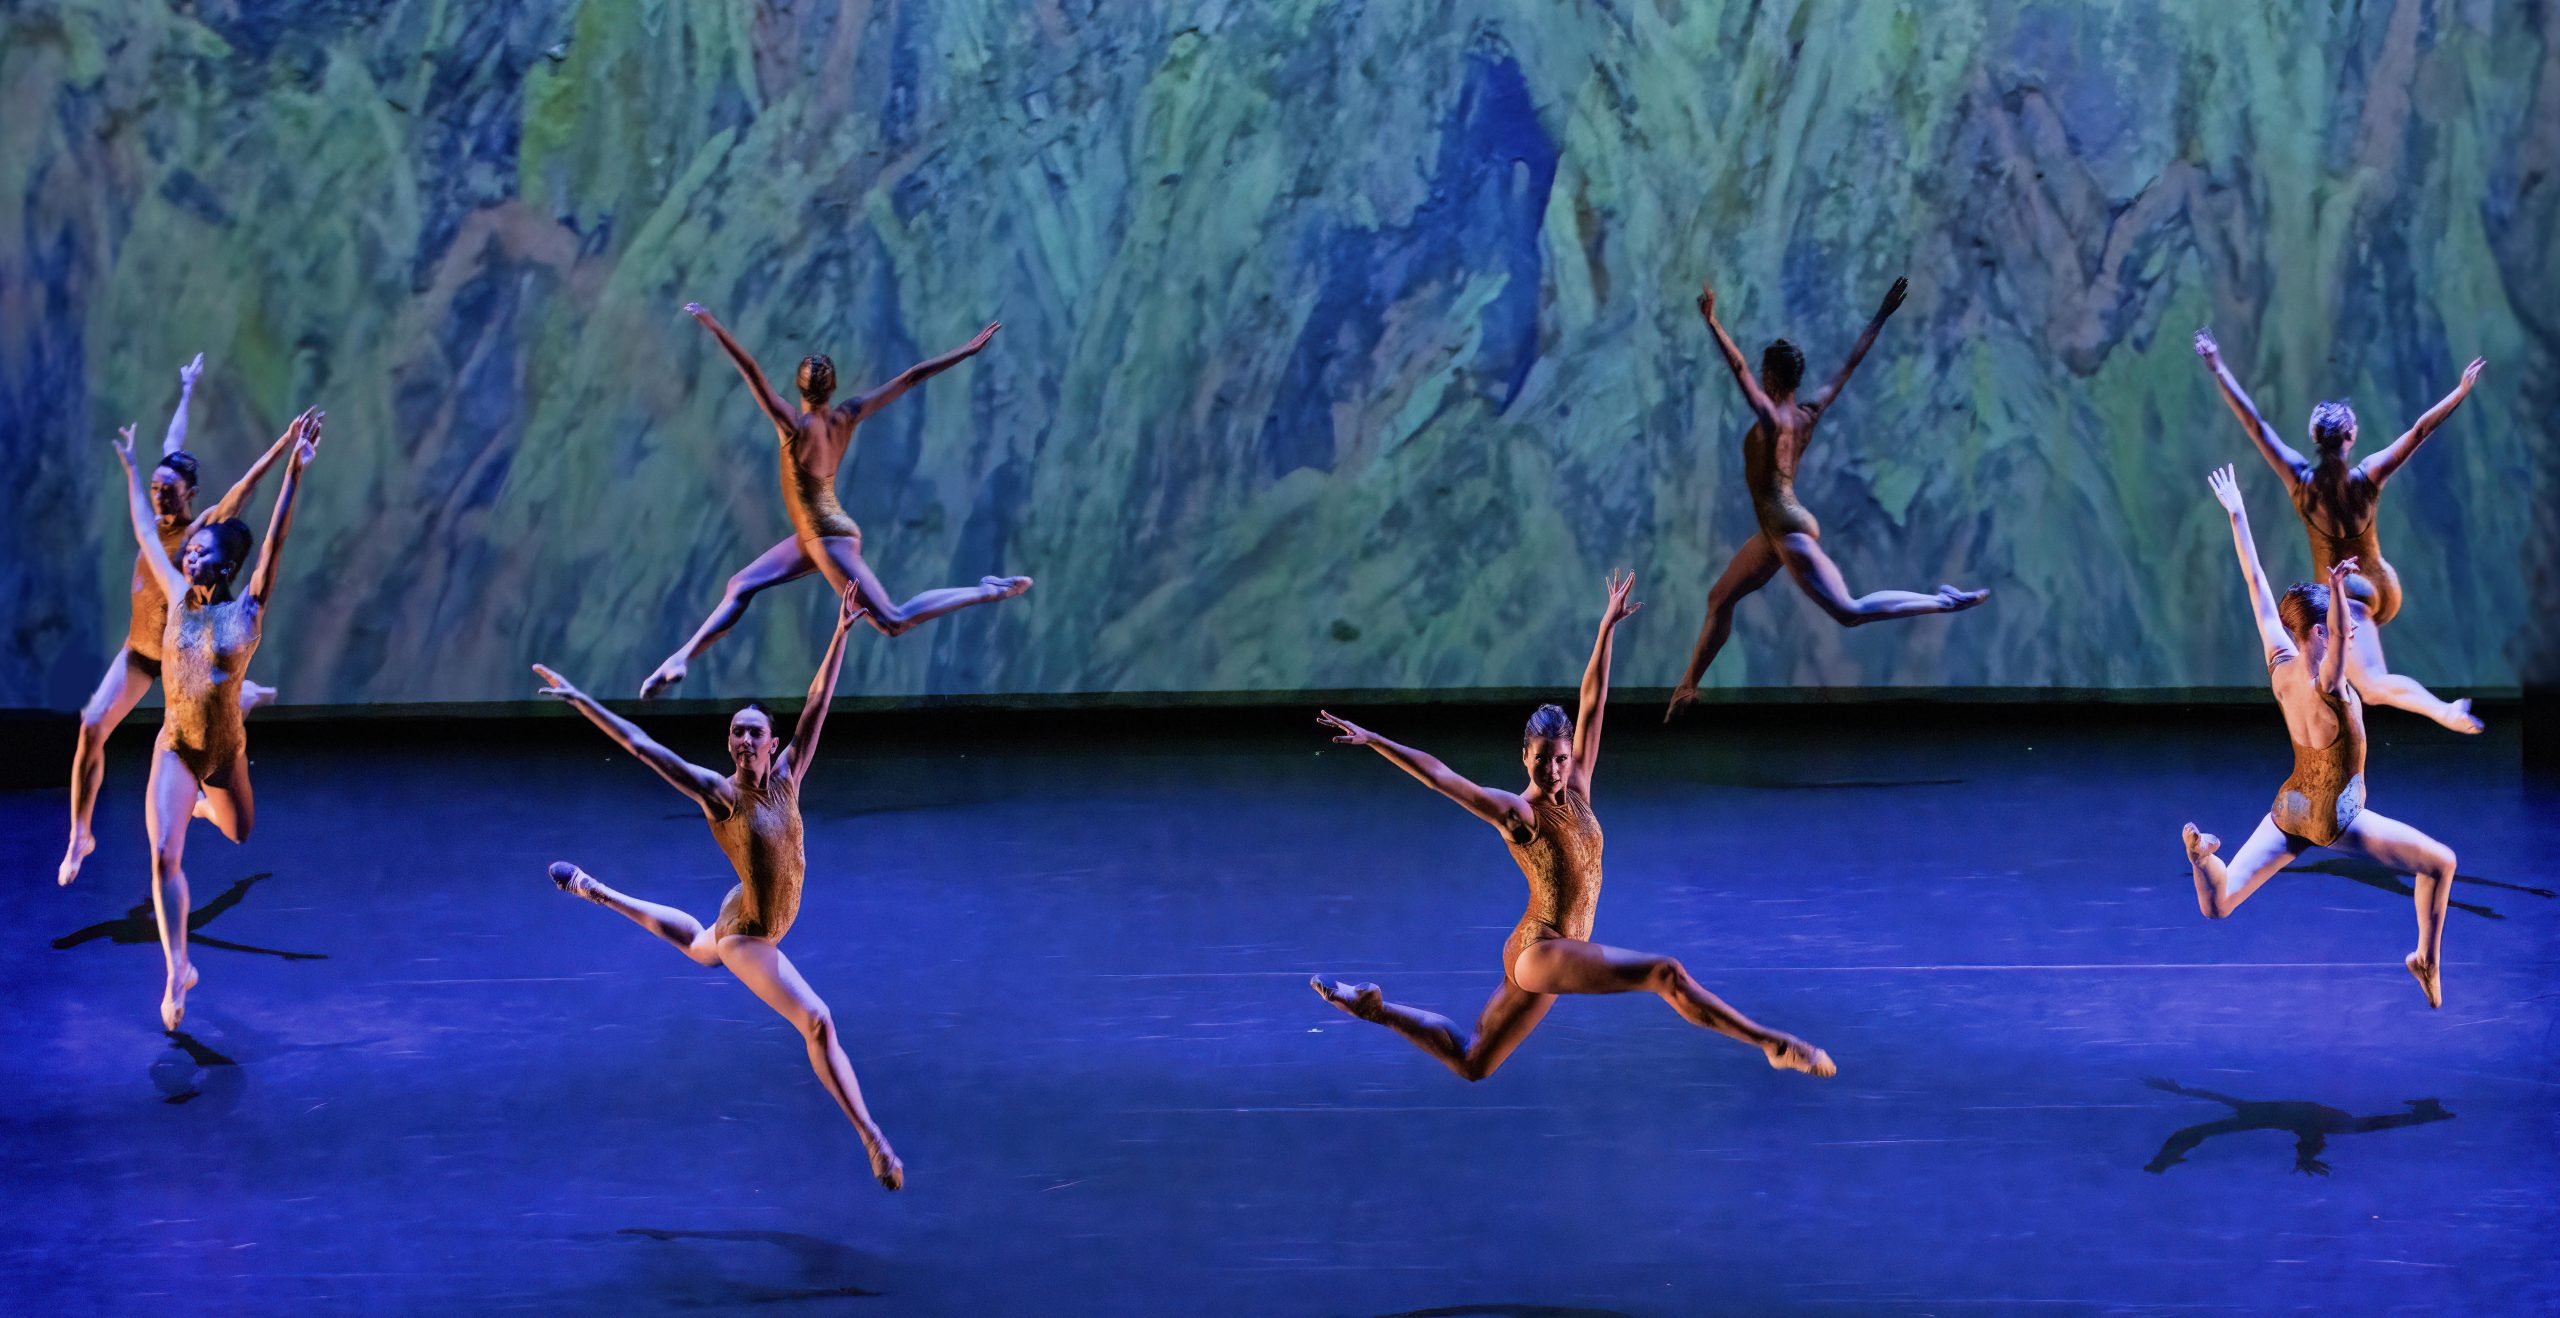 Graceful ballet dancers in perfect unison mid-jump against a painted backdrop, exhibiting the artistry and athleticism of a dance performance.